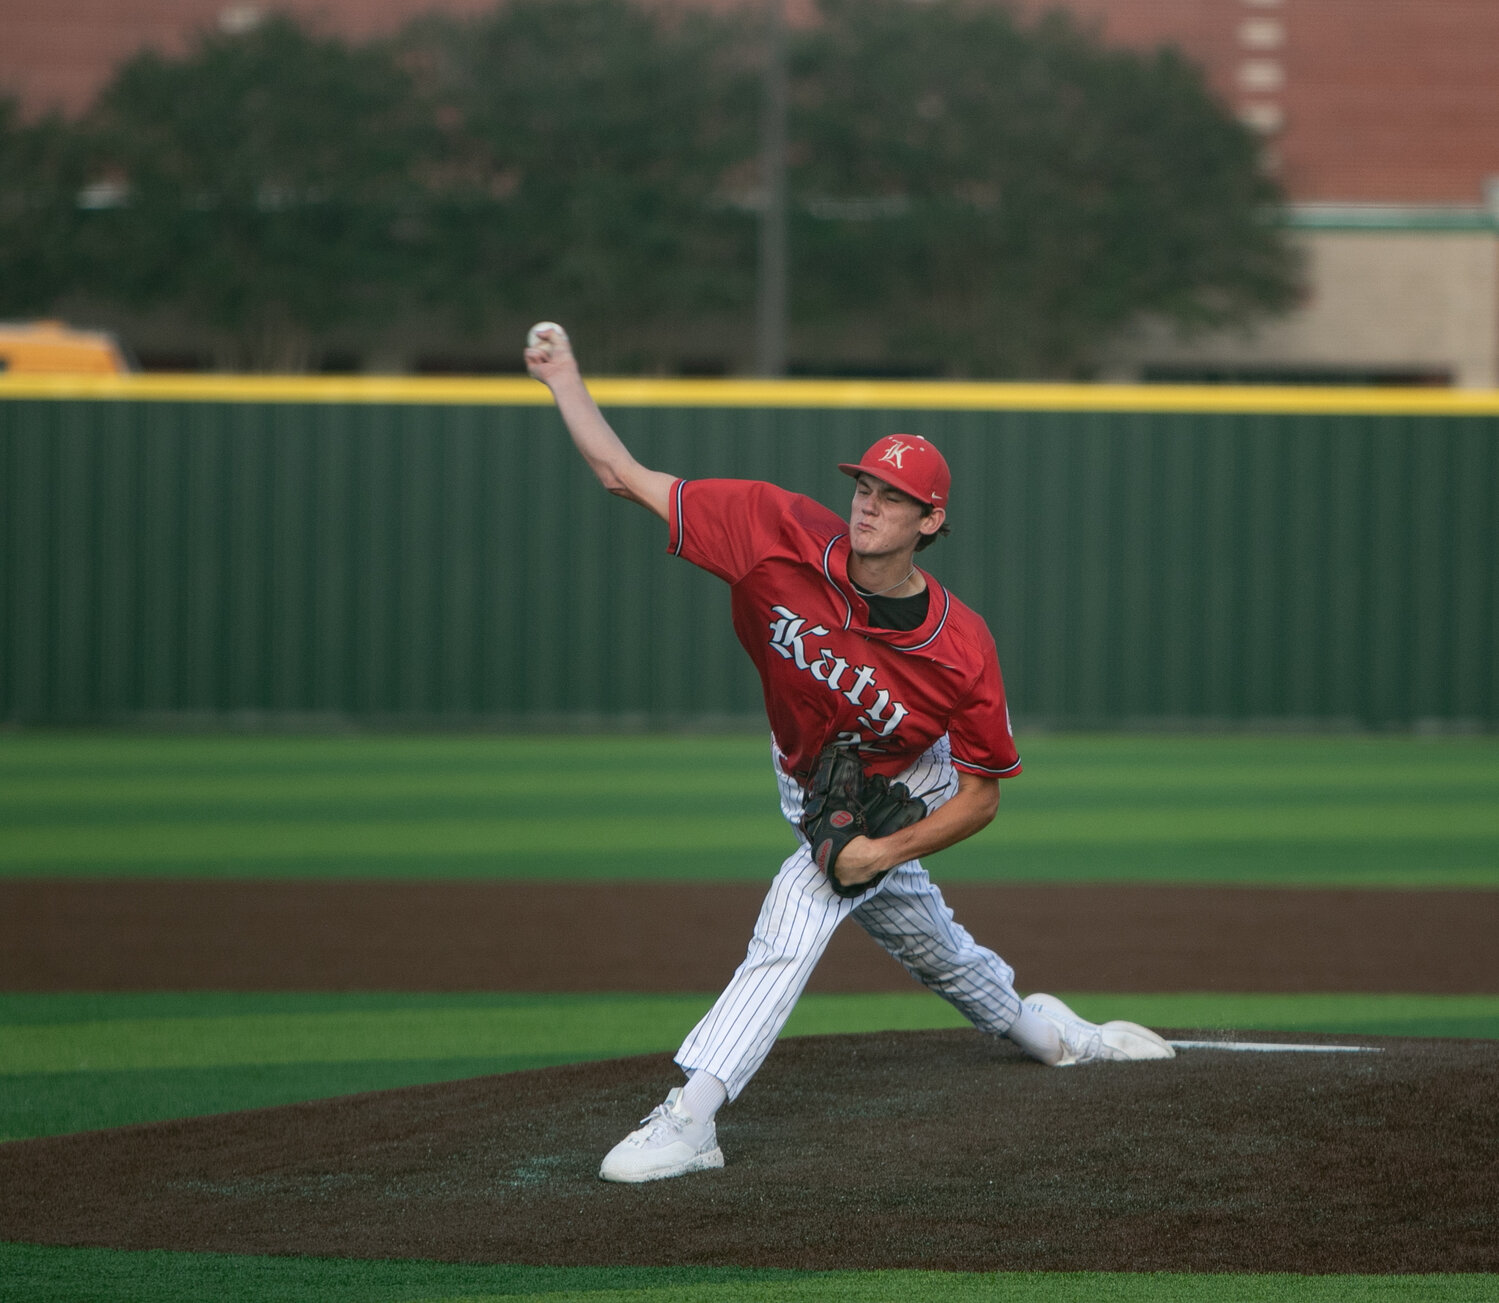 Cade Nelson pitches during Saturday's Regional Quarterfinal between Katy and Tompkins at Cy-Springs.